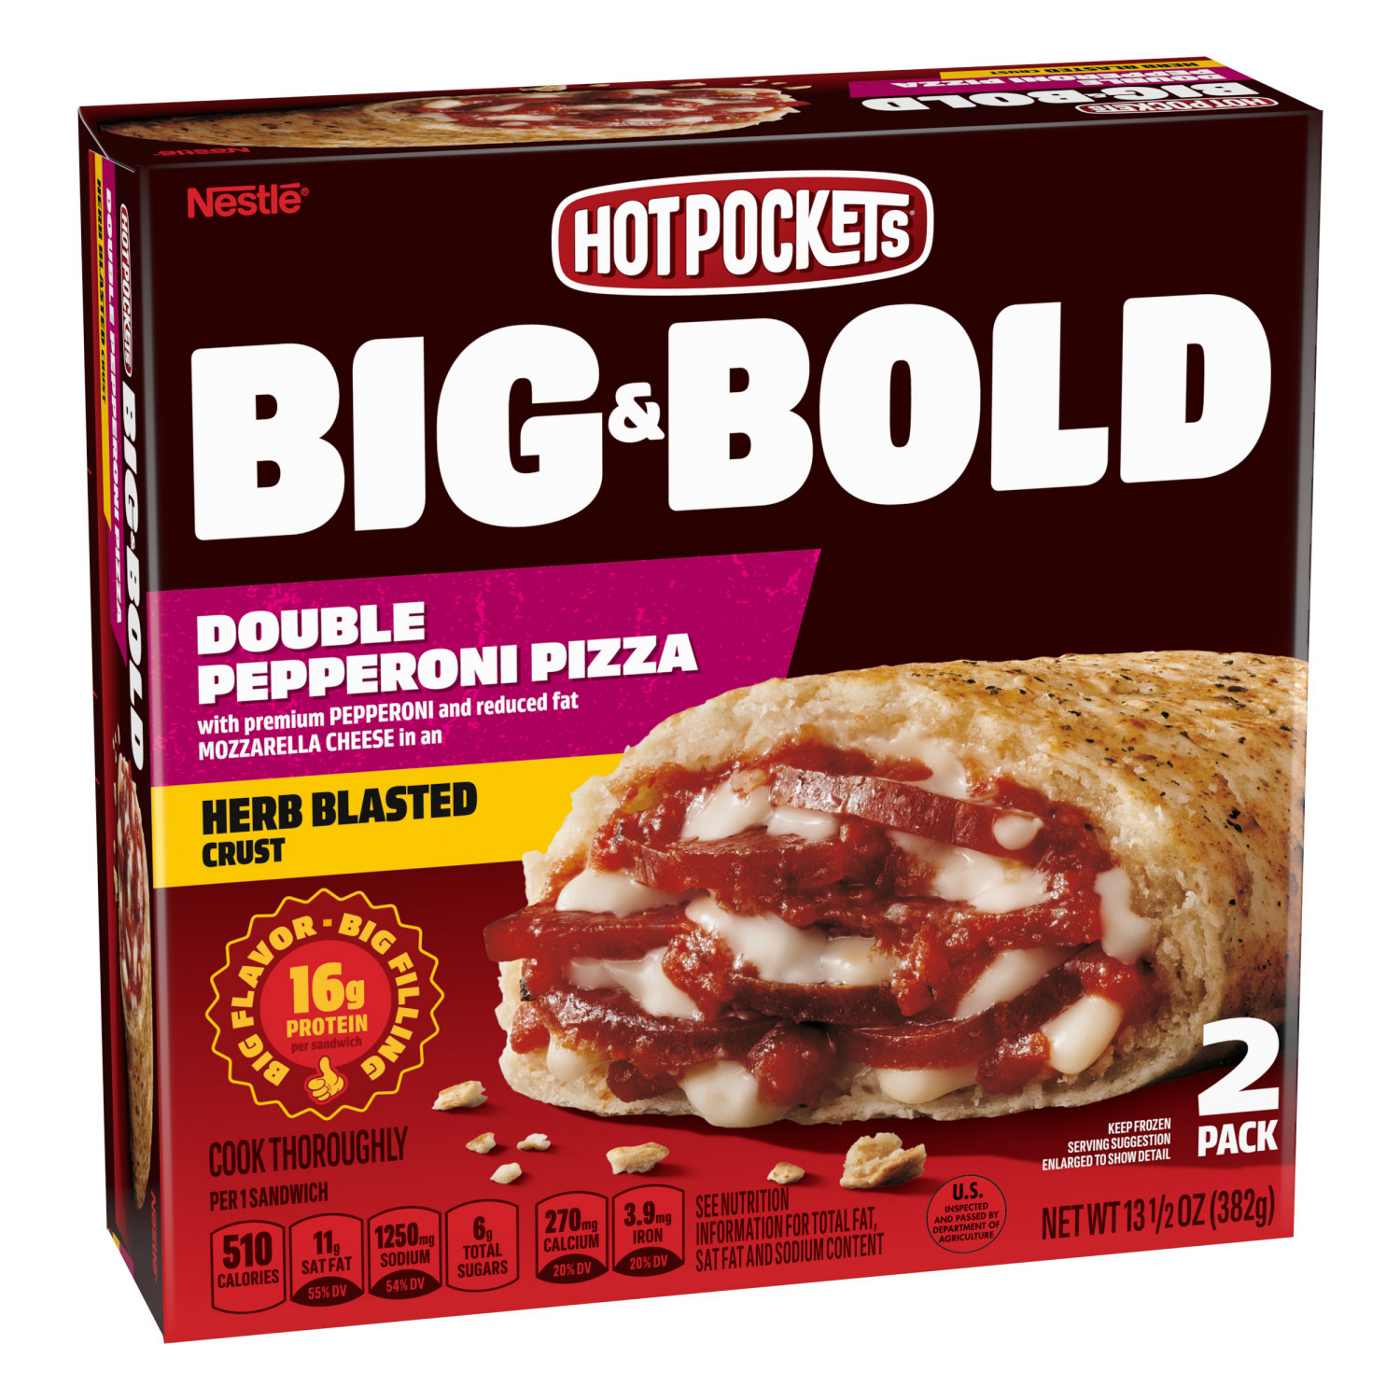 Hot Pockets Big & Bold Double Pepperoni Pizza Sandwiches; image 1 of 8